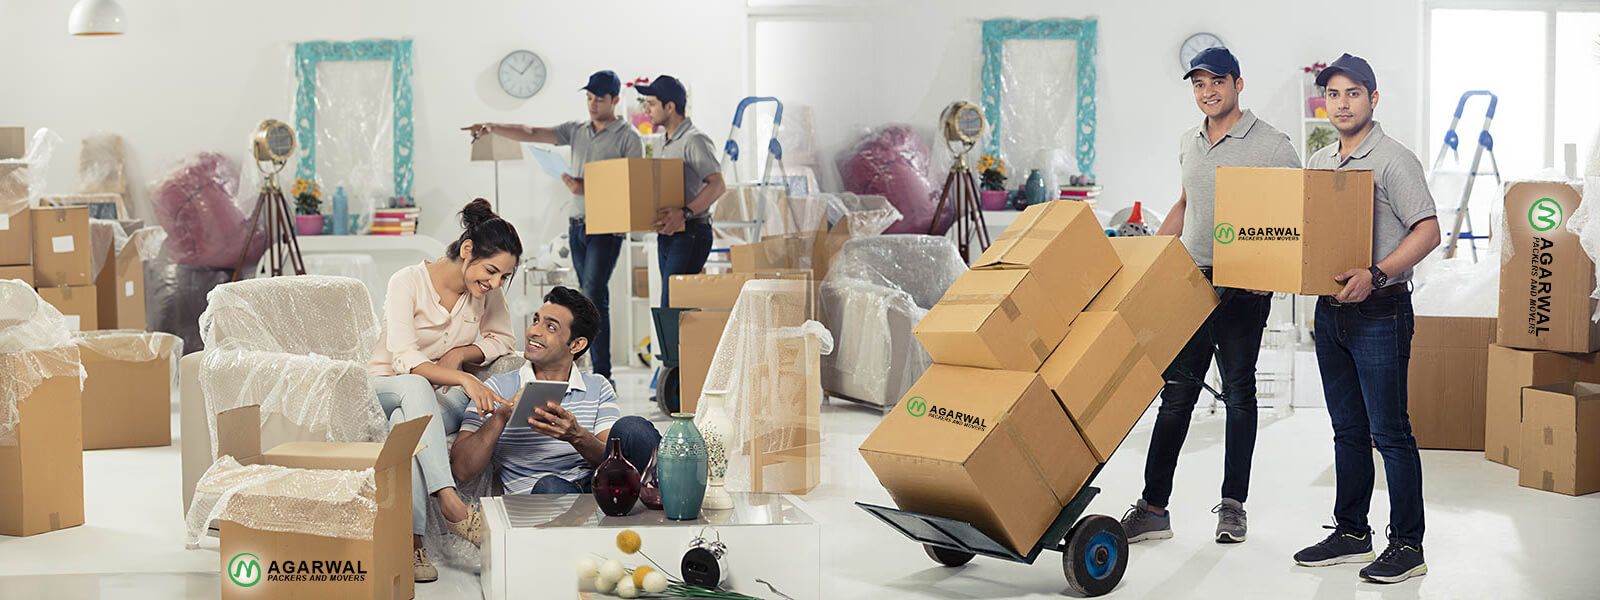  Agarwal Packers and Movers in Gurgaon | Call- 9650208070 